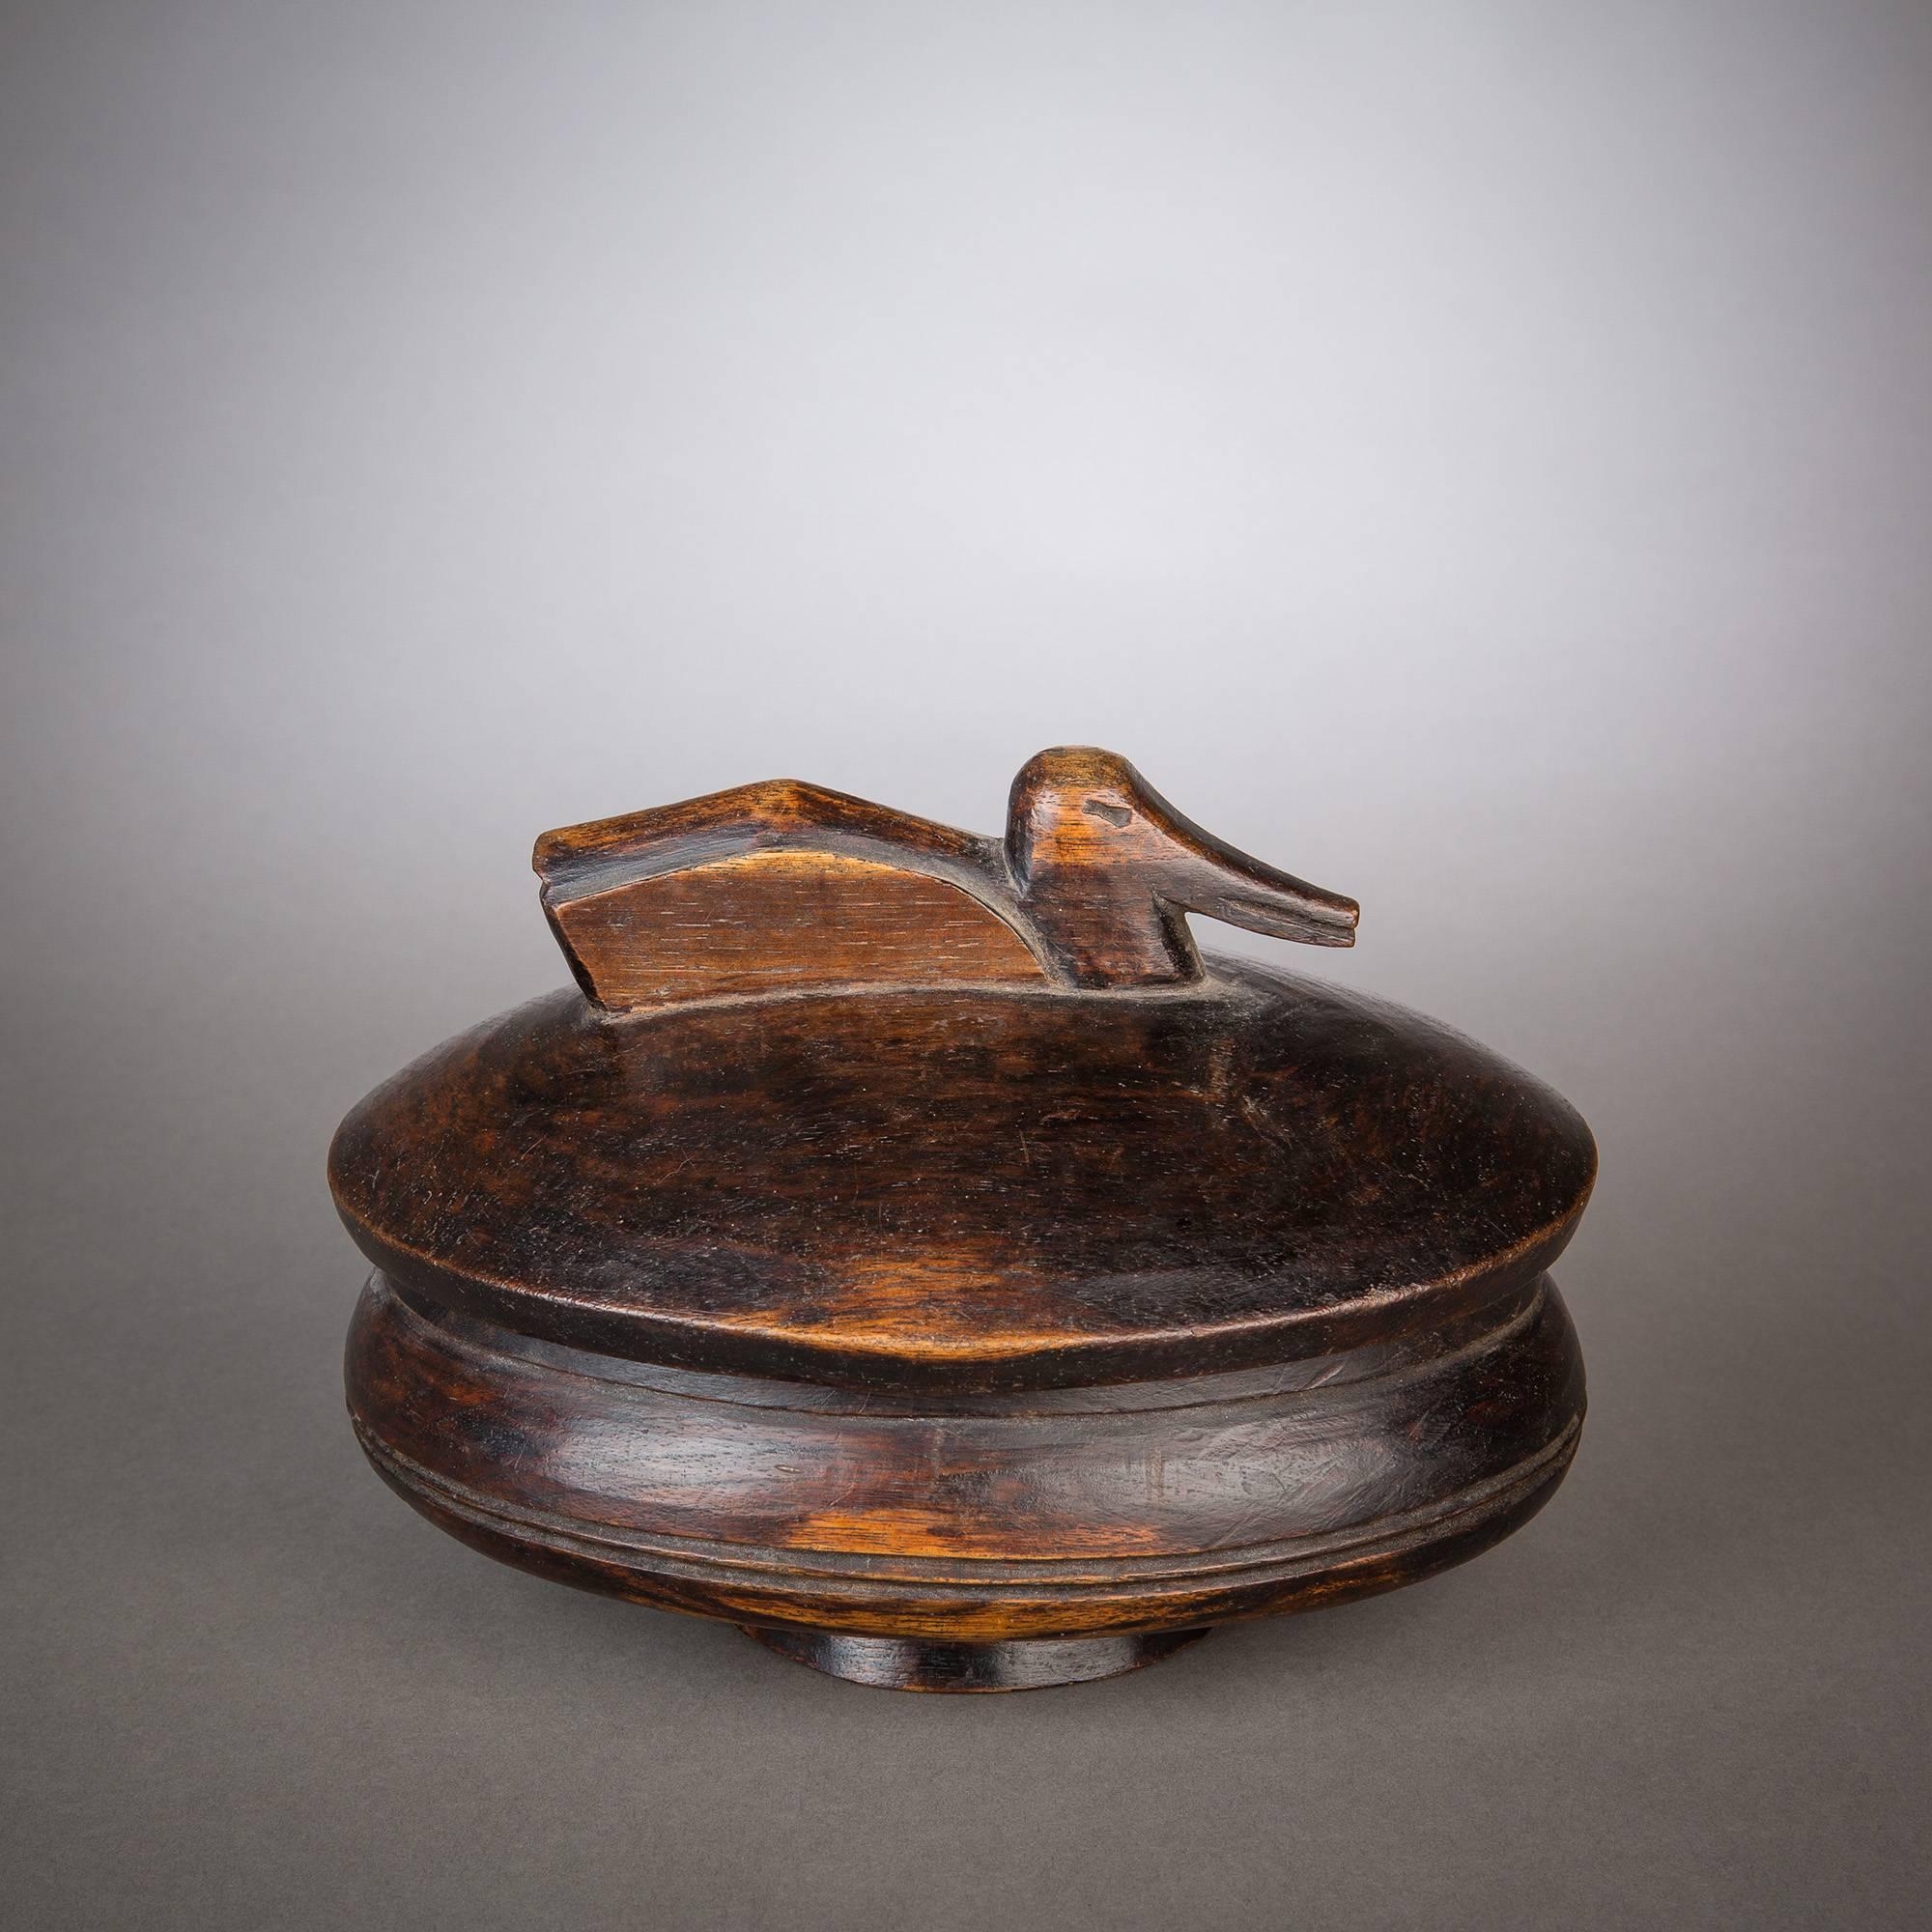 A beautifully carved lidded bowl with a decorative handle in the form of a swimming duck. This vessel is graced with a lovely, developed patina that displays deep, dark browns alongside warm umbers and honey-colored highlights.

The Lozi used